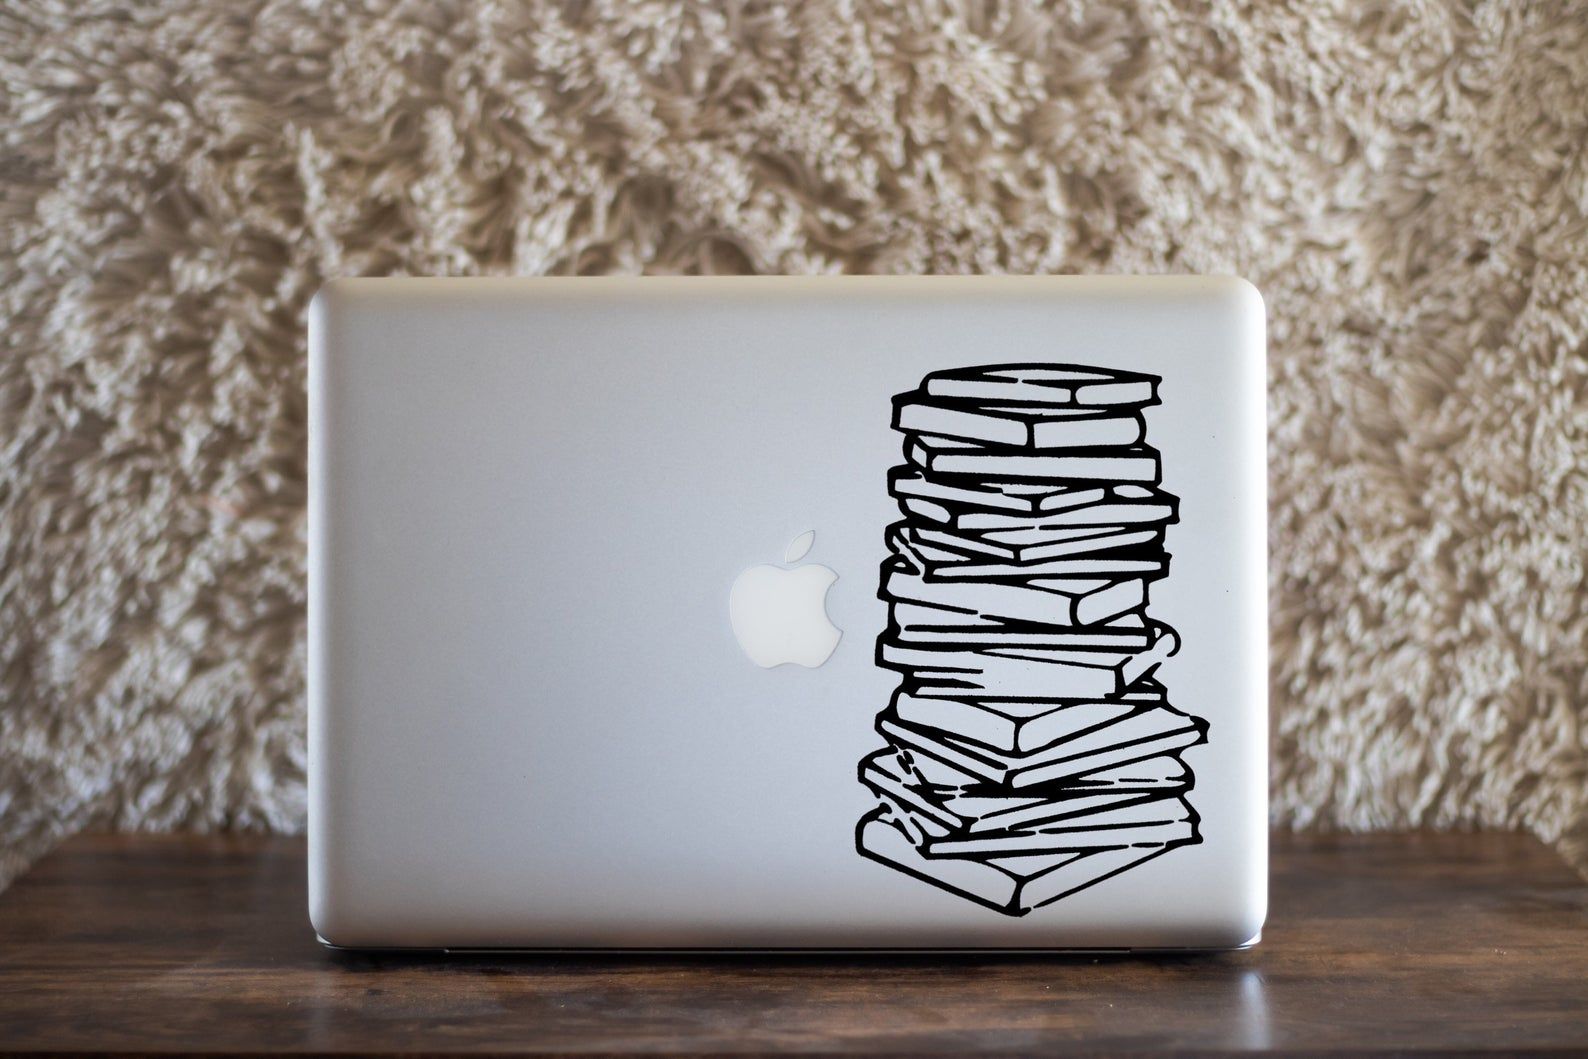 a silver laptop computer with a vinyl book stack decal